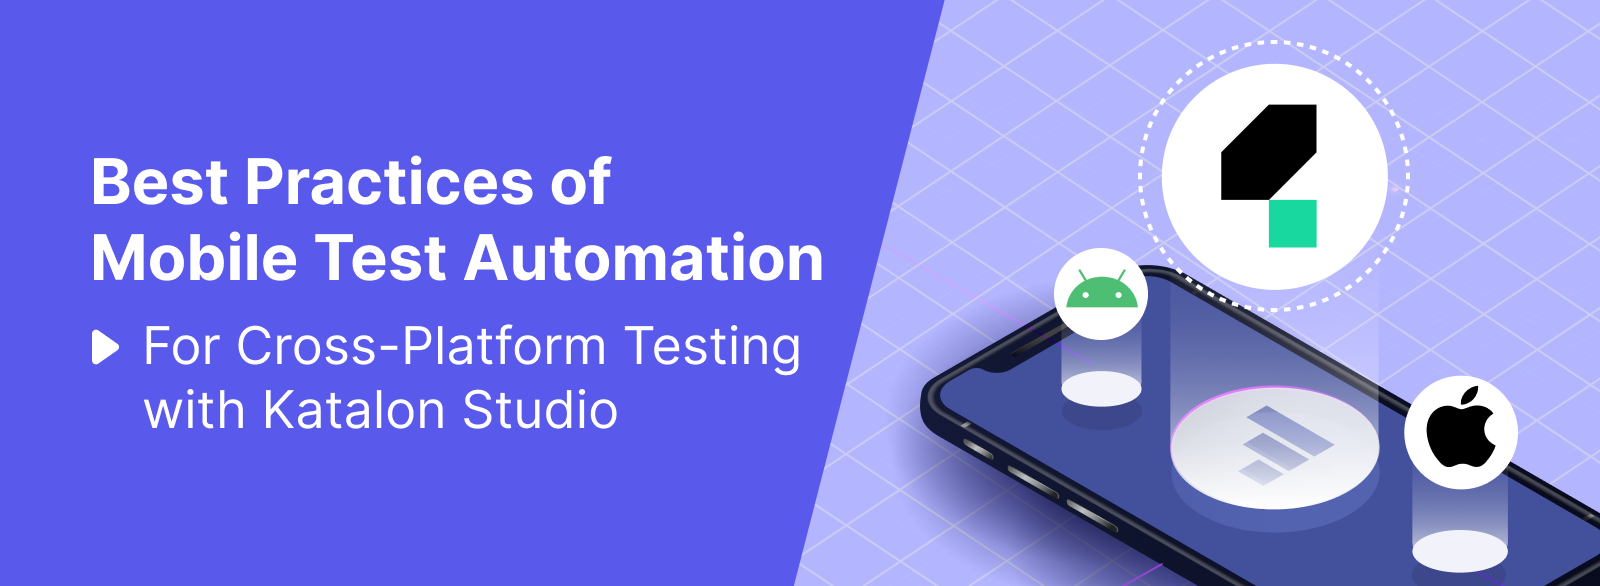 best practices of mobile test automation for cross-platform testing with Katalon